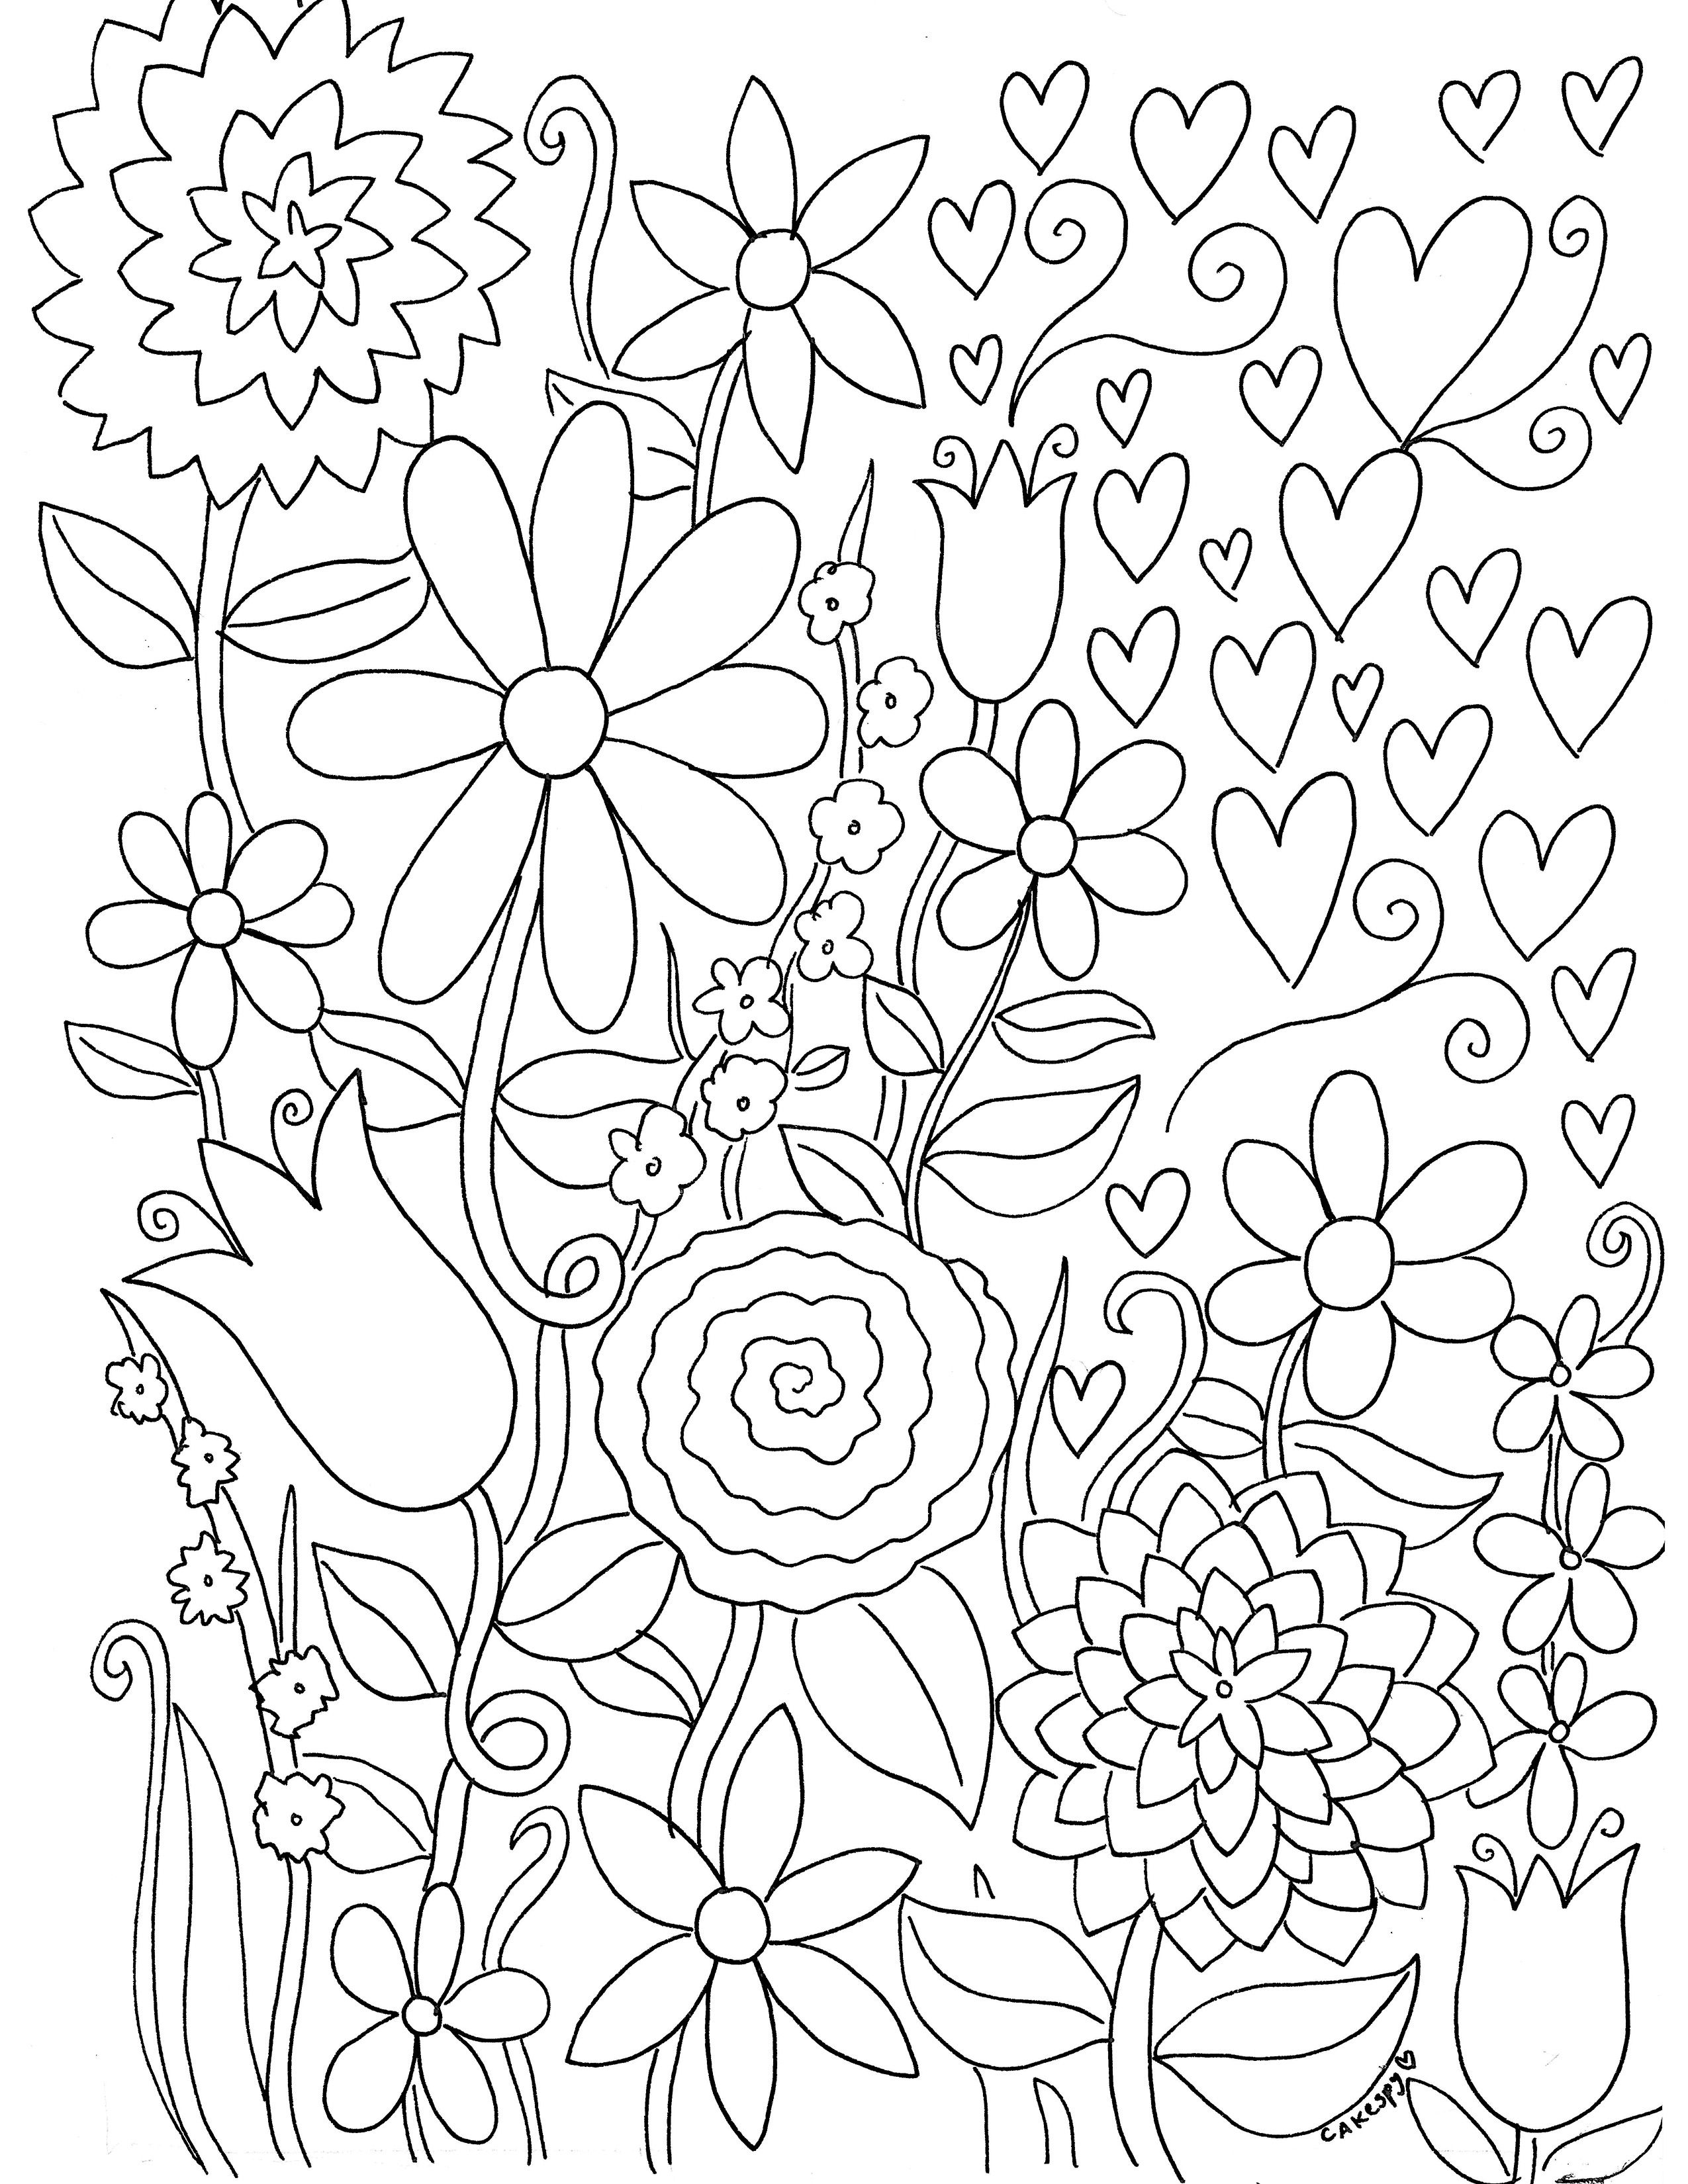 6 Superb Love Coloring Pages | arinbertgrill.com